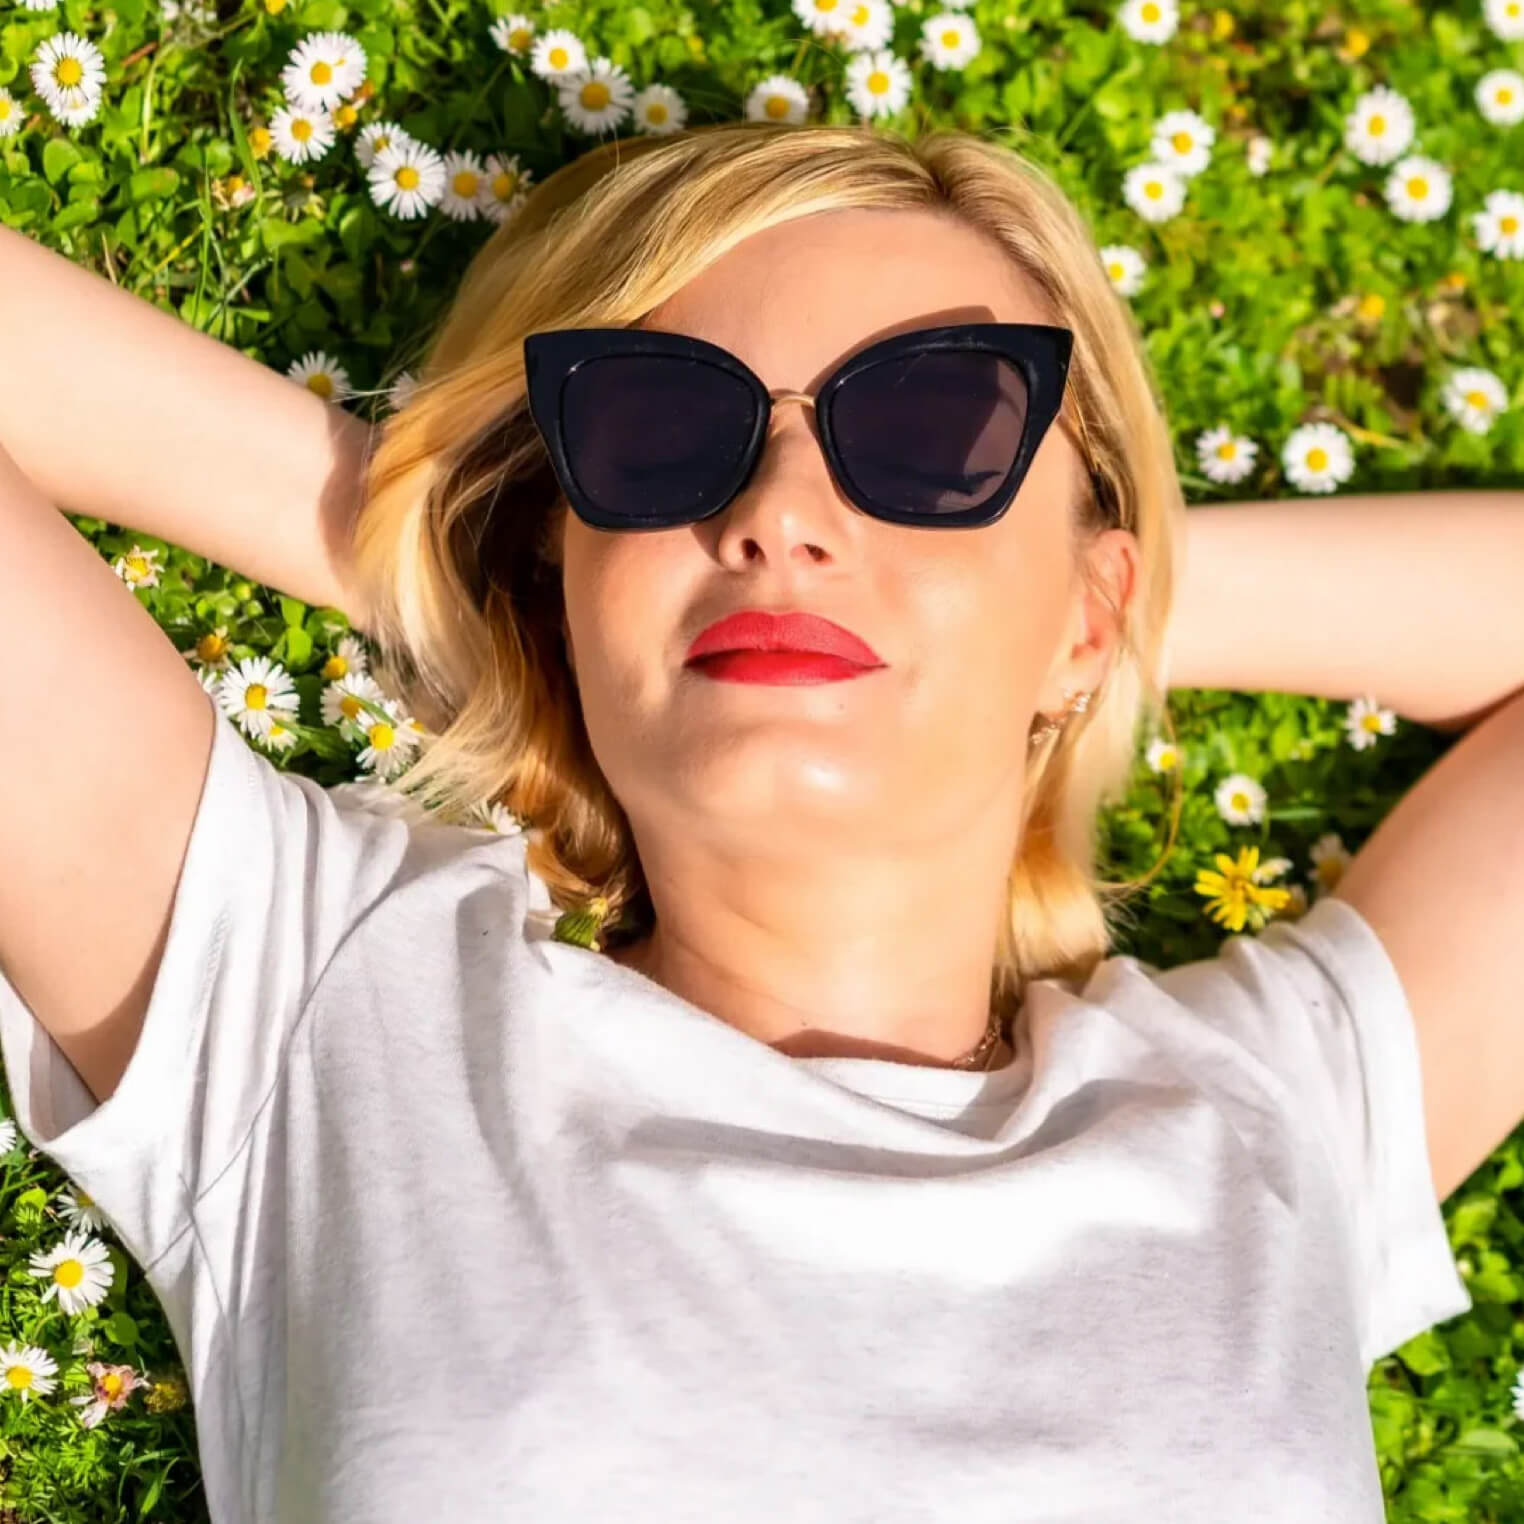 Young woman with blonde hair and stylish sunglasses relaxing in a bed of flowers